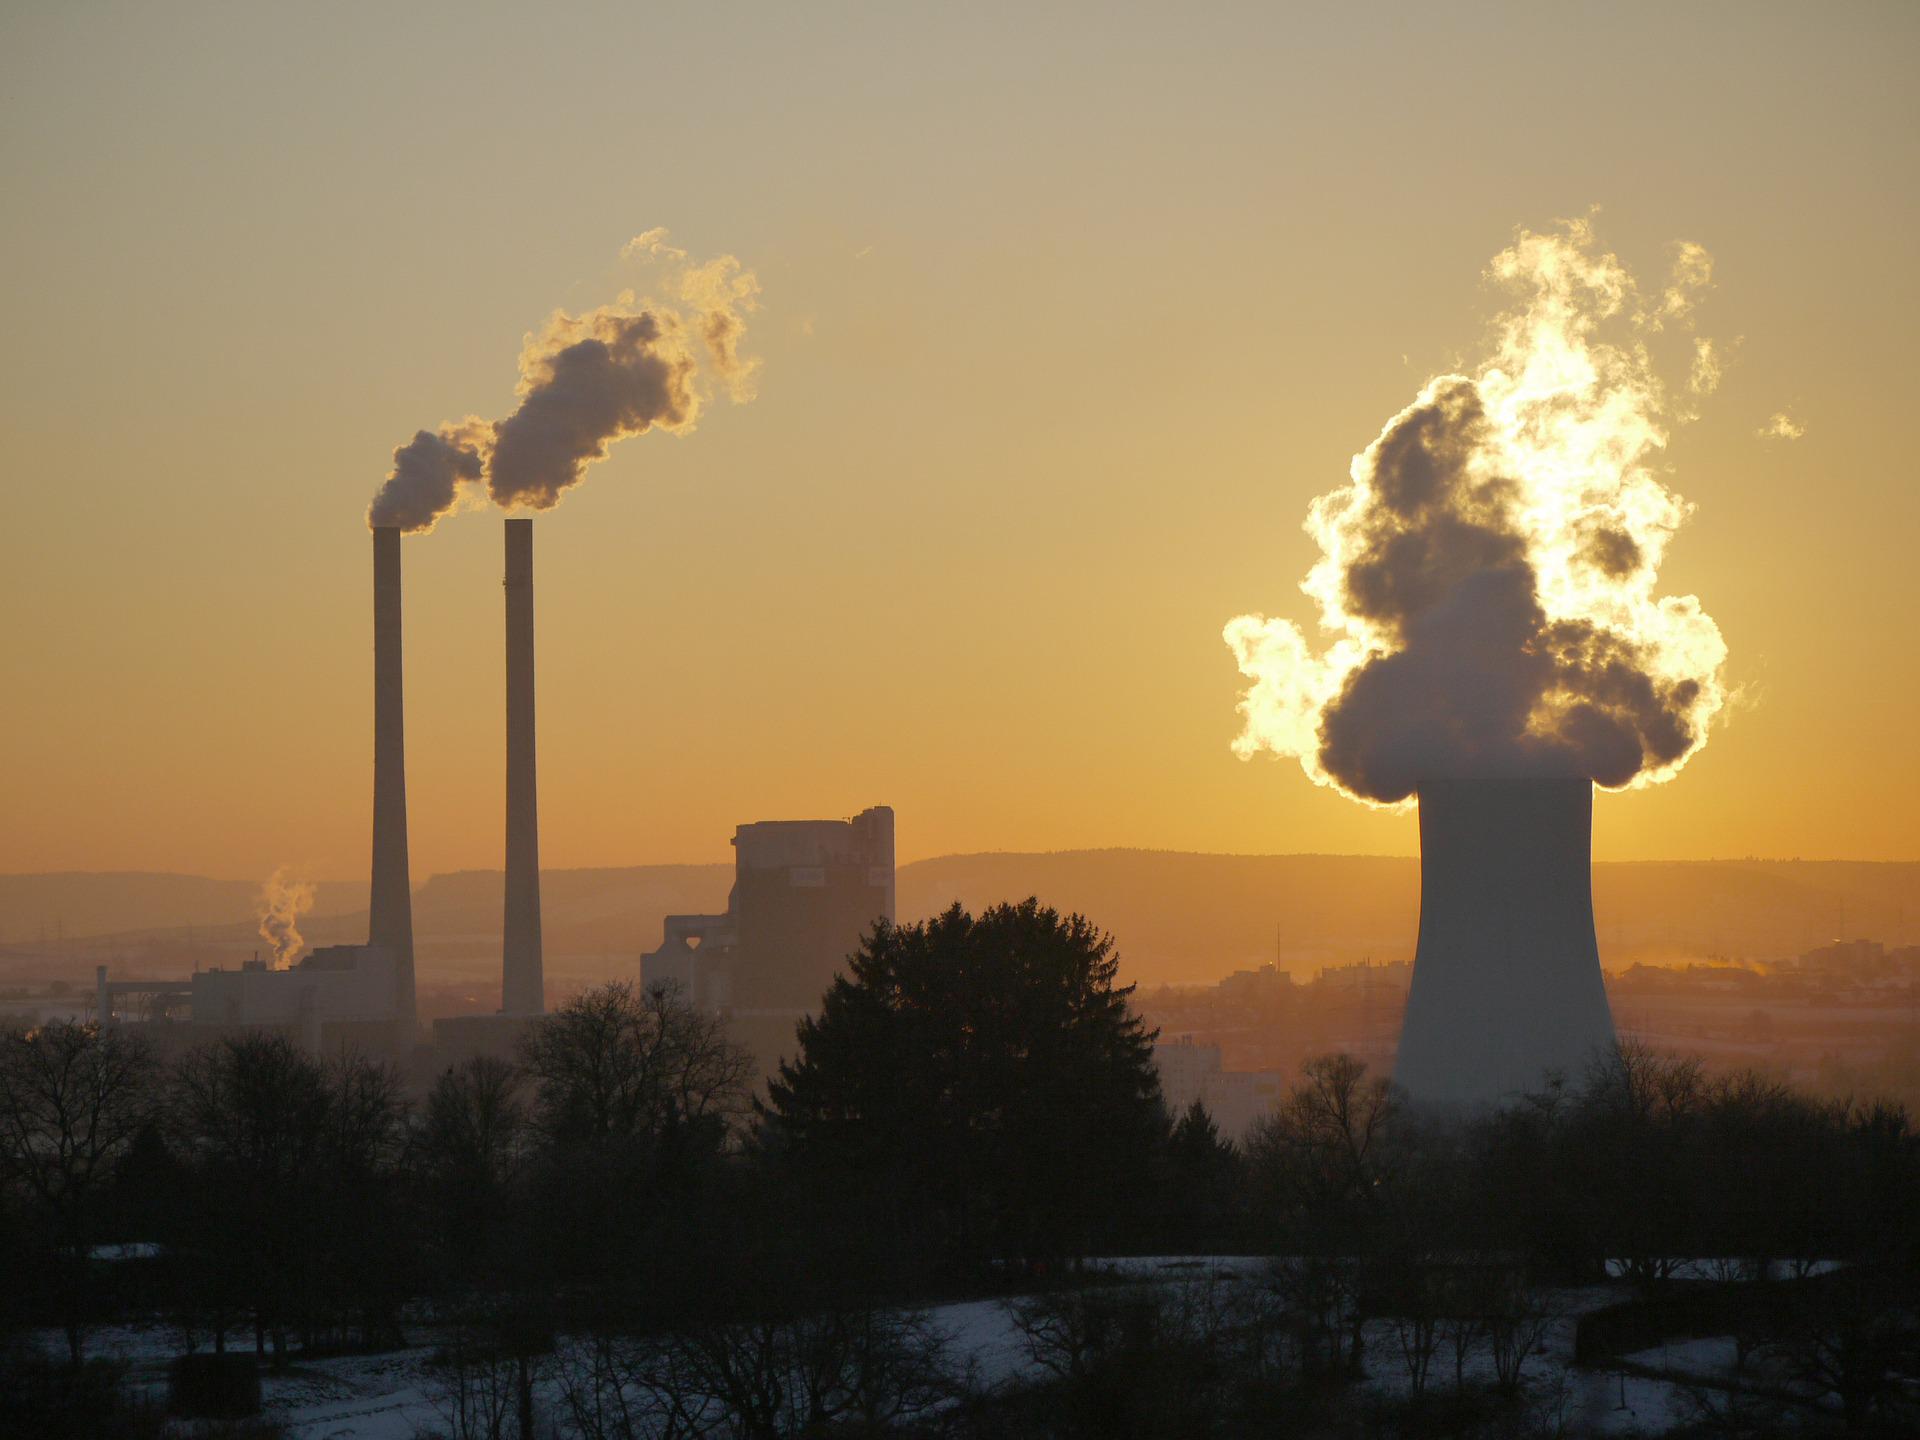 A power plant industry with two thin, long chimneys and a big chimney emitting smoke